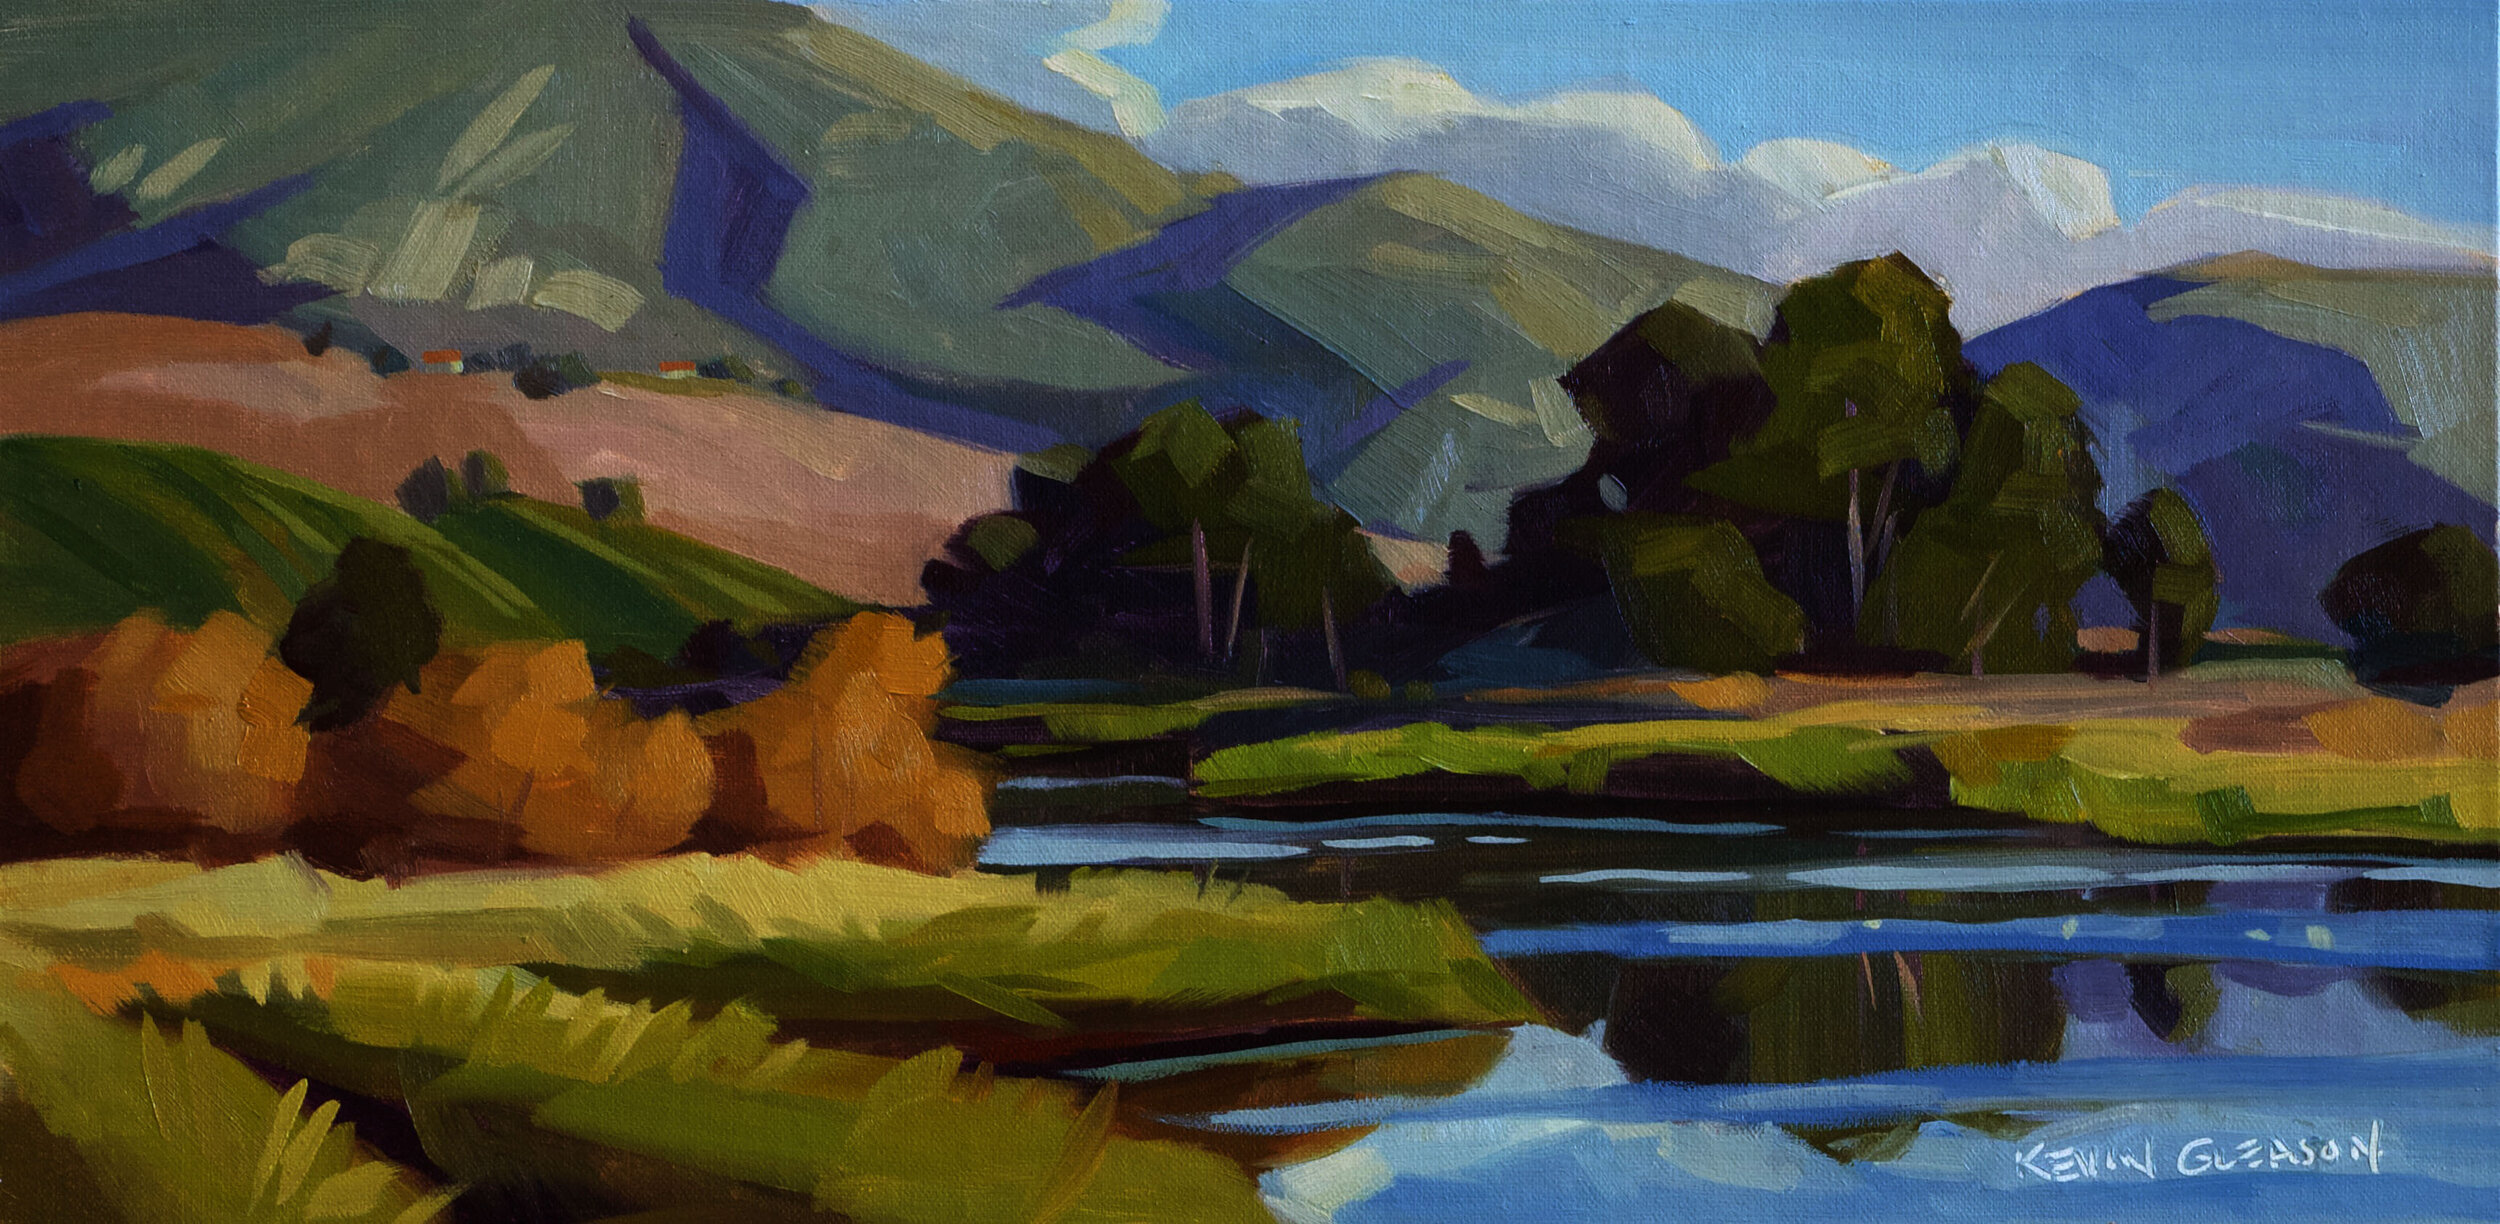 Kevin Gleason, "Lake Los Carneros After the Rain," Oil on linen panel